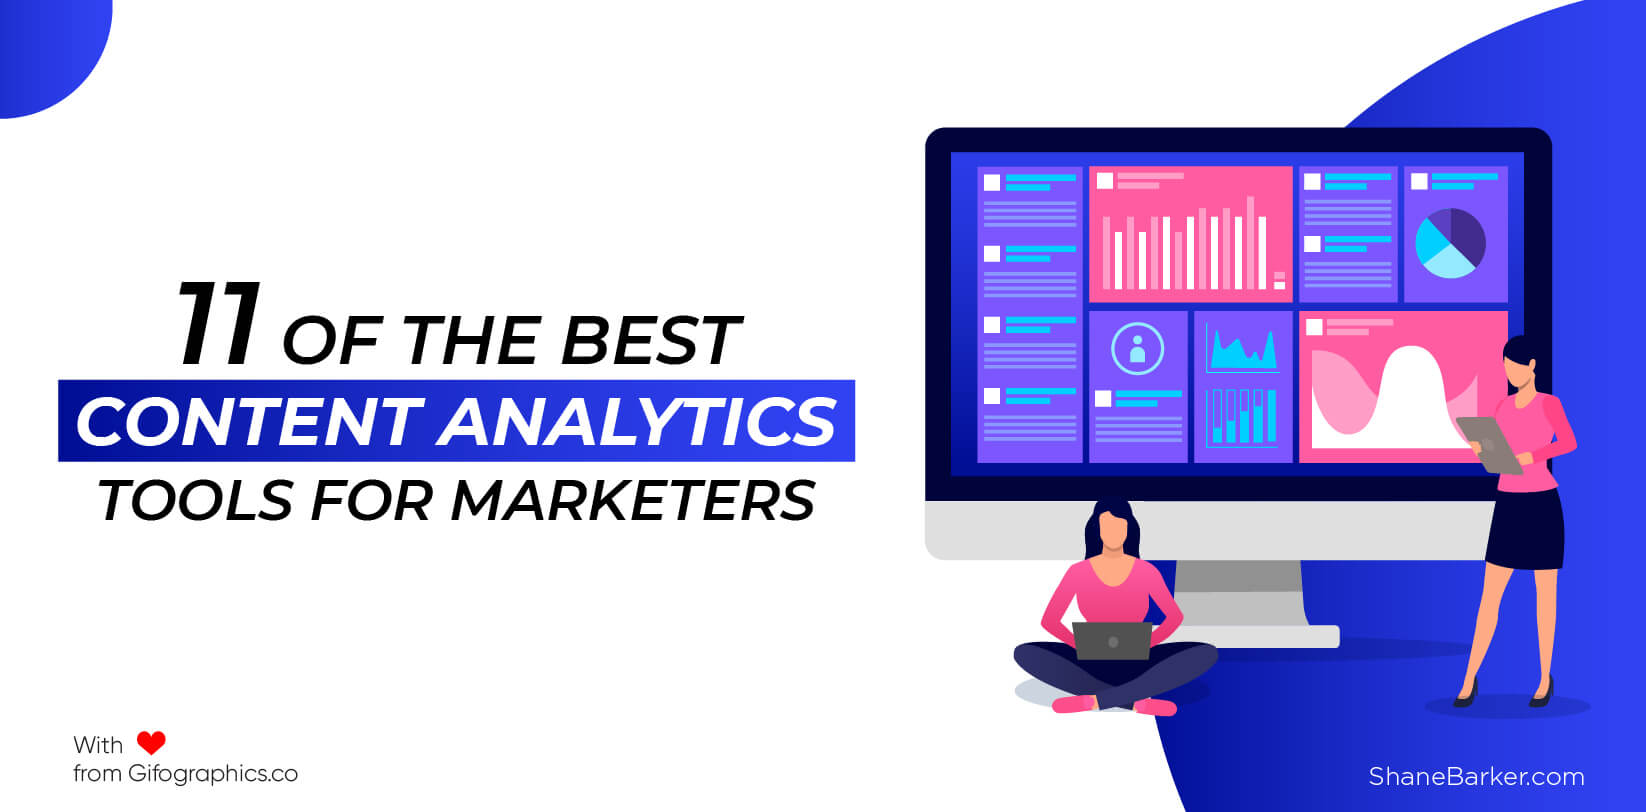 11 of the best content analytics tools for marketers